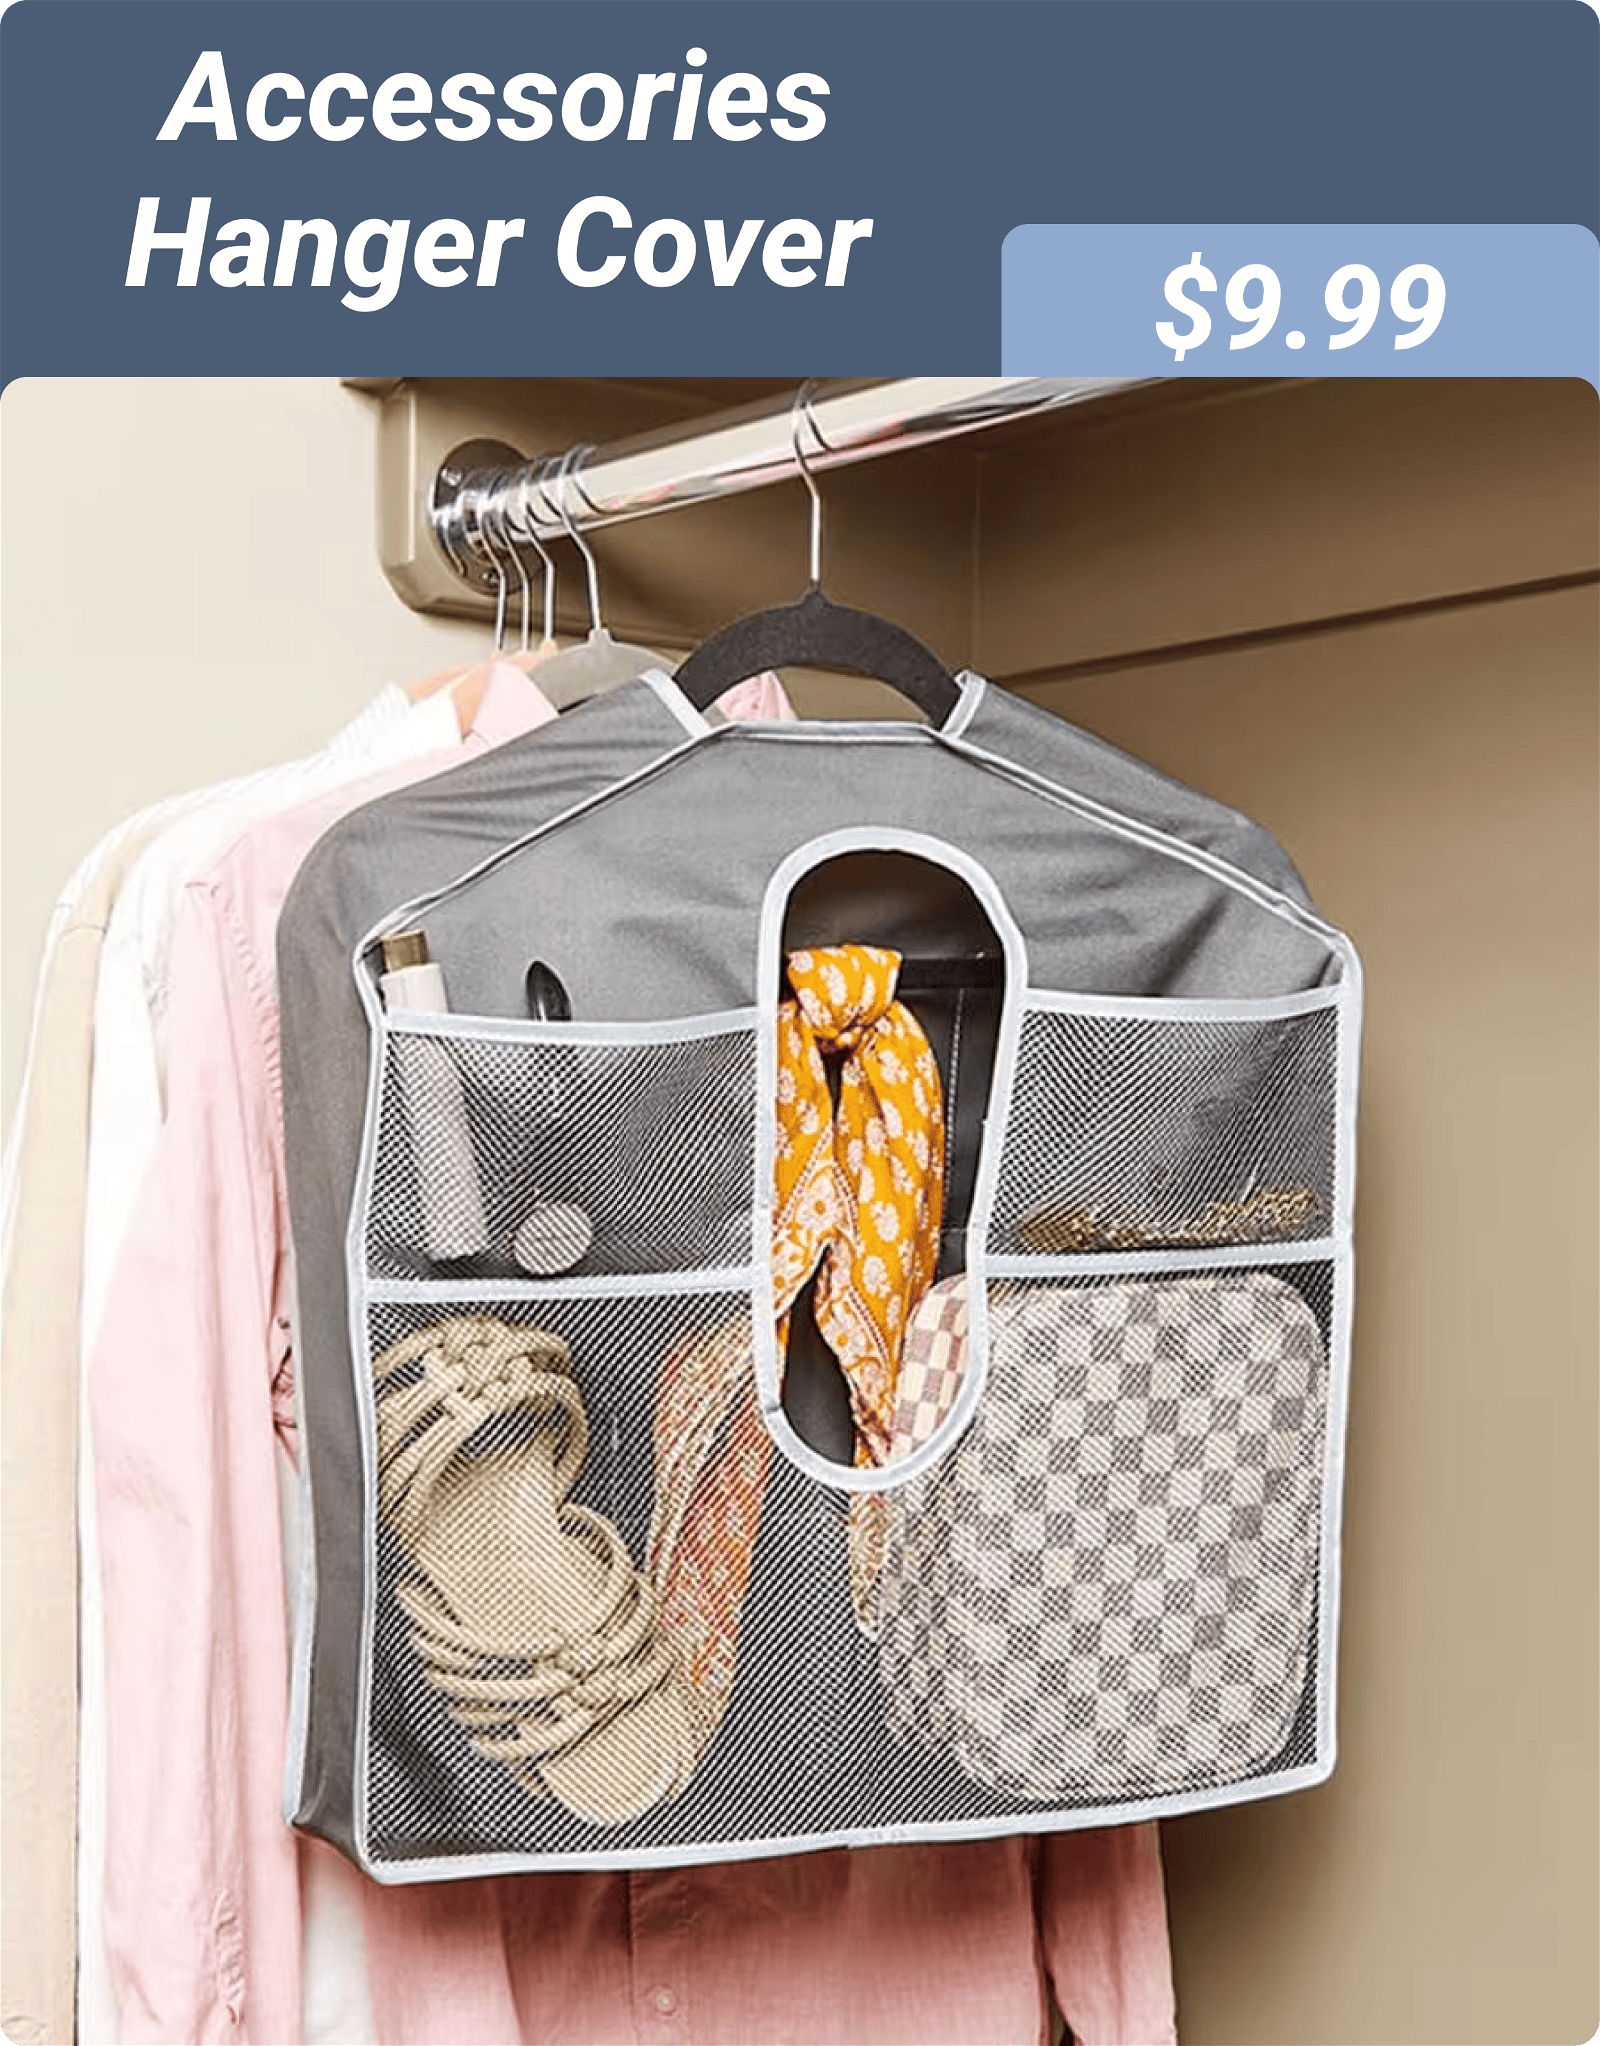 Accessories Hanger Cover